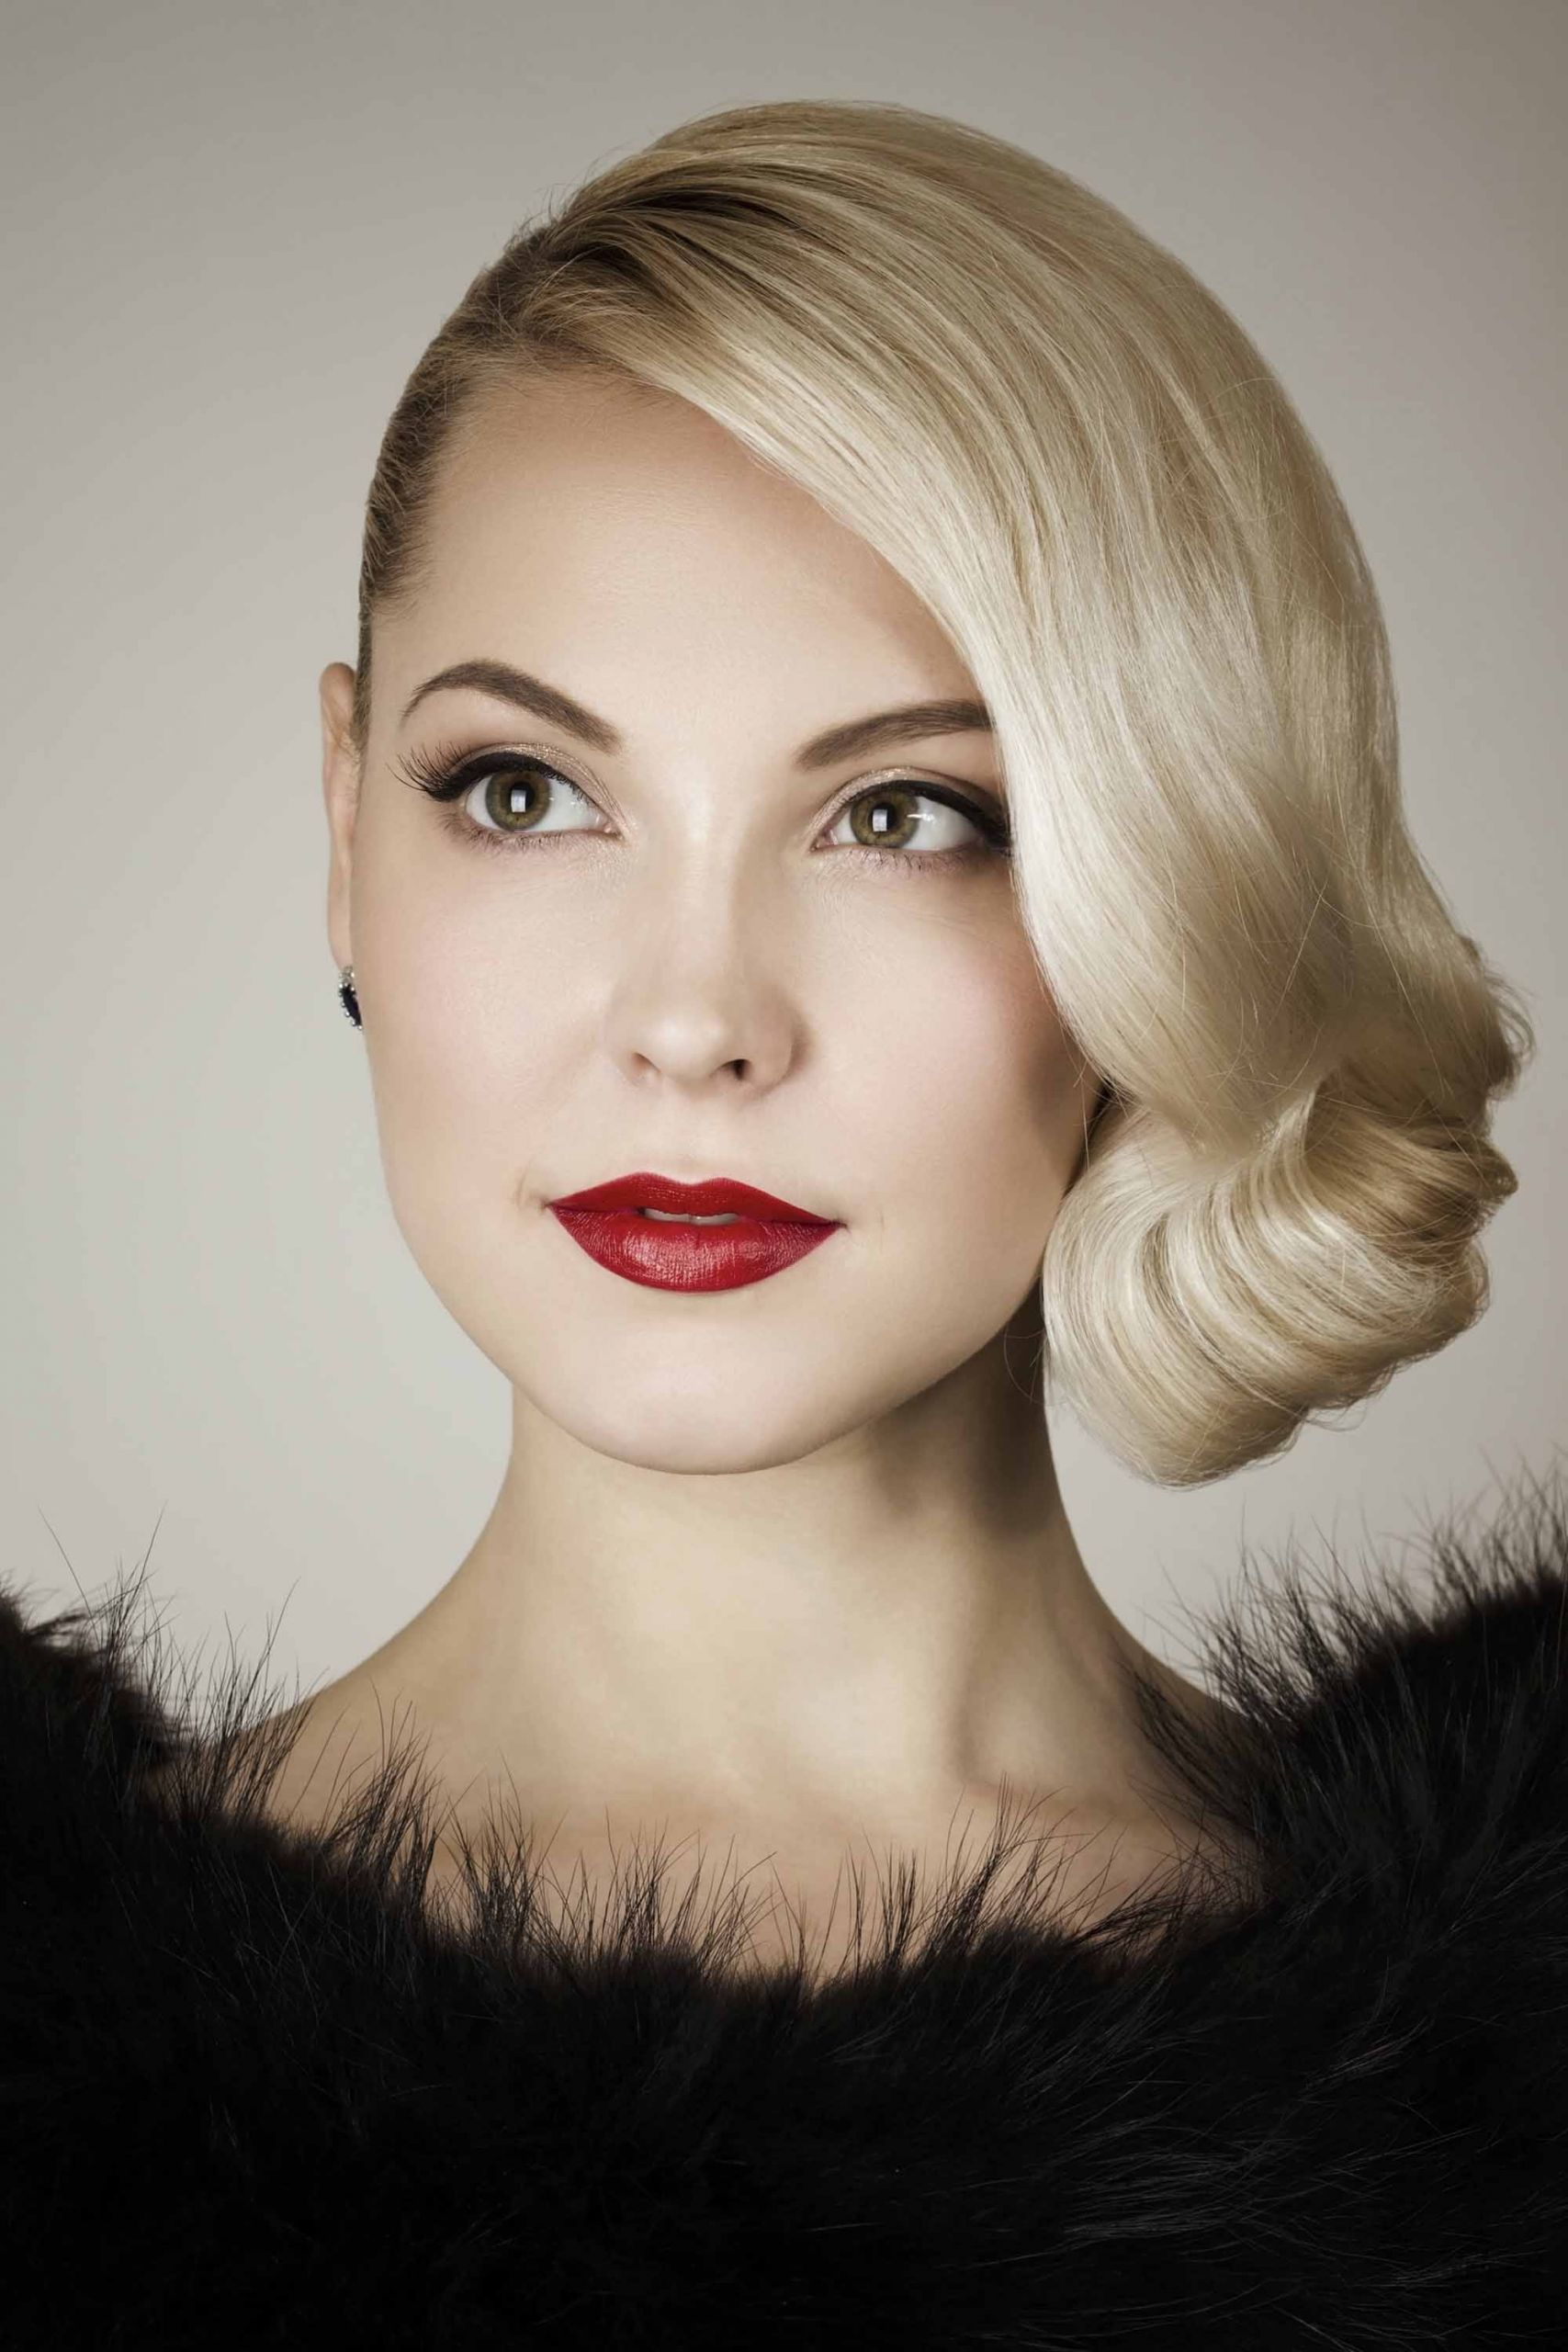 Great Gatsby Hairstyles For Long Hair
 11 Glam Great Gatsby Hairstyles for Halloween and Beyond